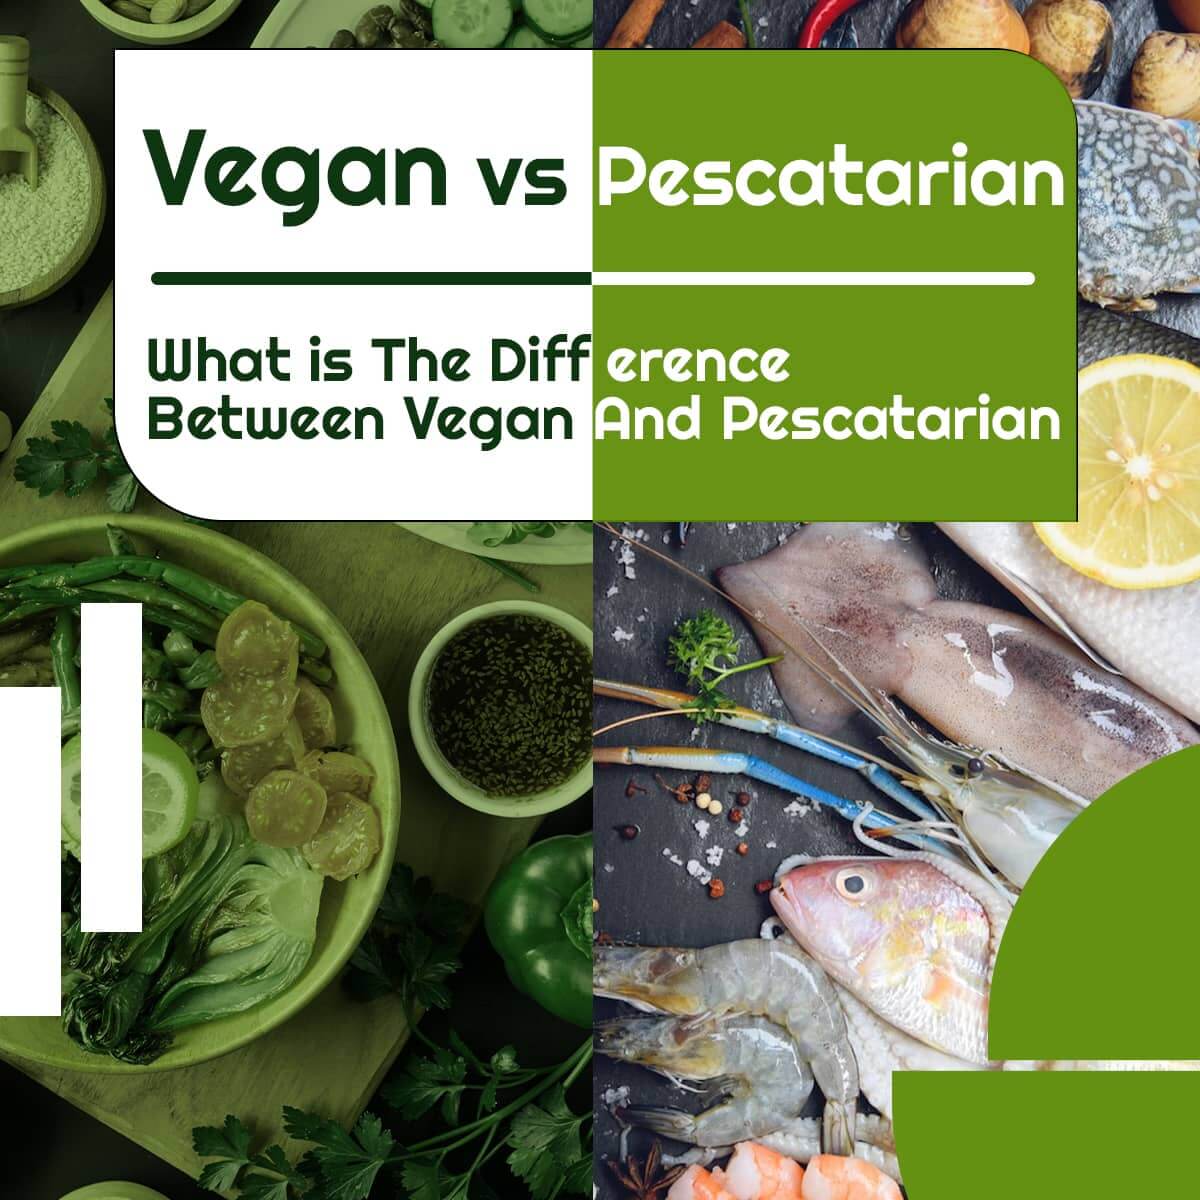 What is The Difference Between Vegan And Pescatarian